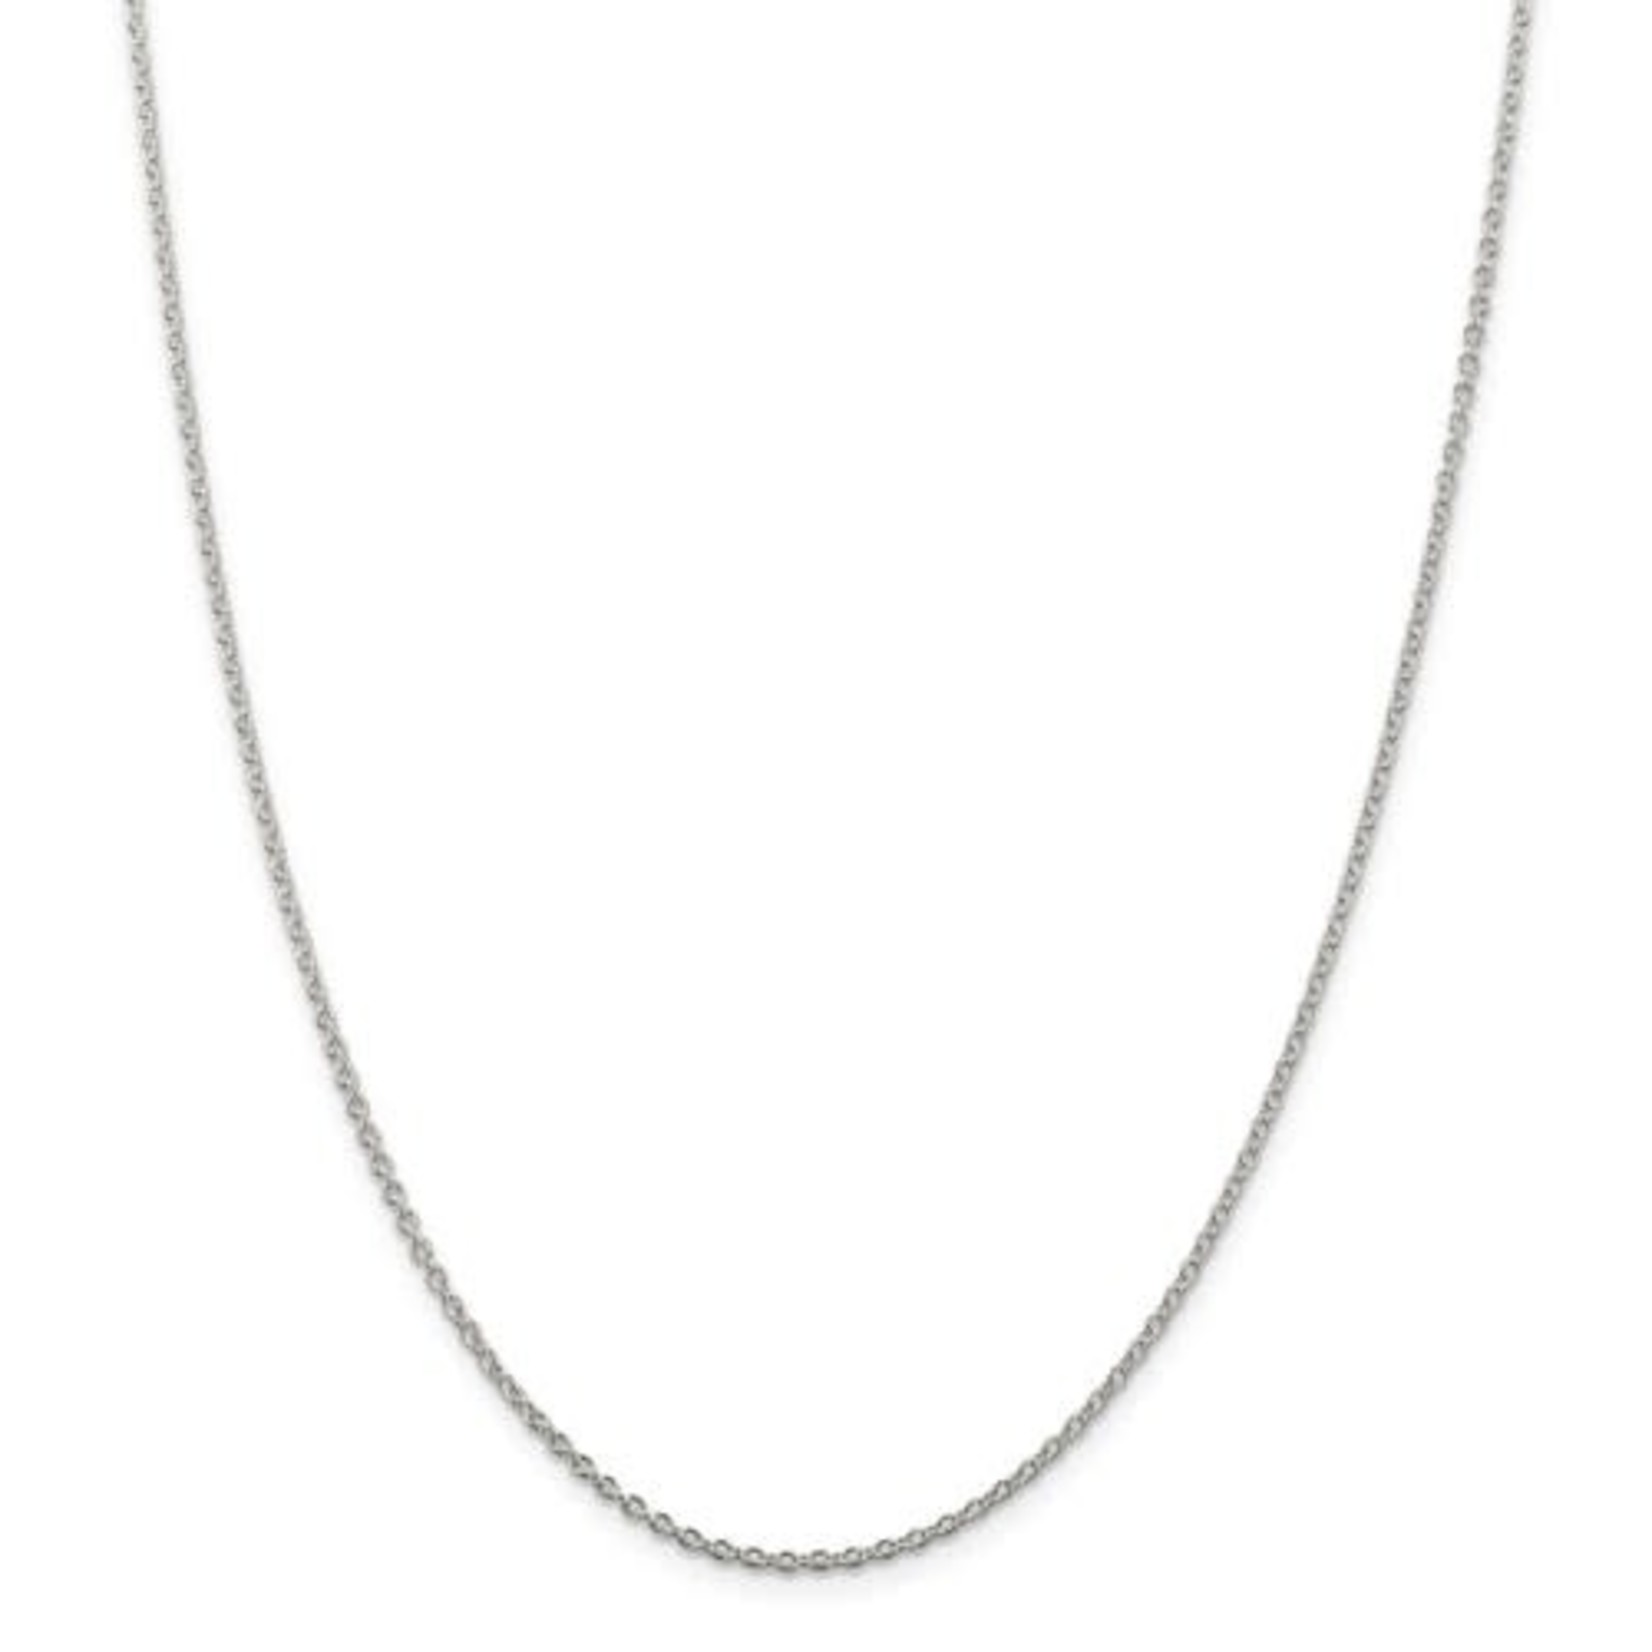 This Is Life Cable Chain - Sterling Silver 18"